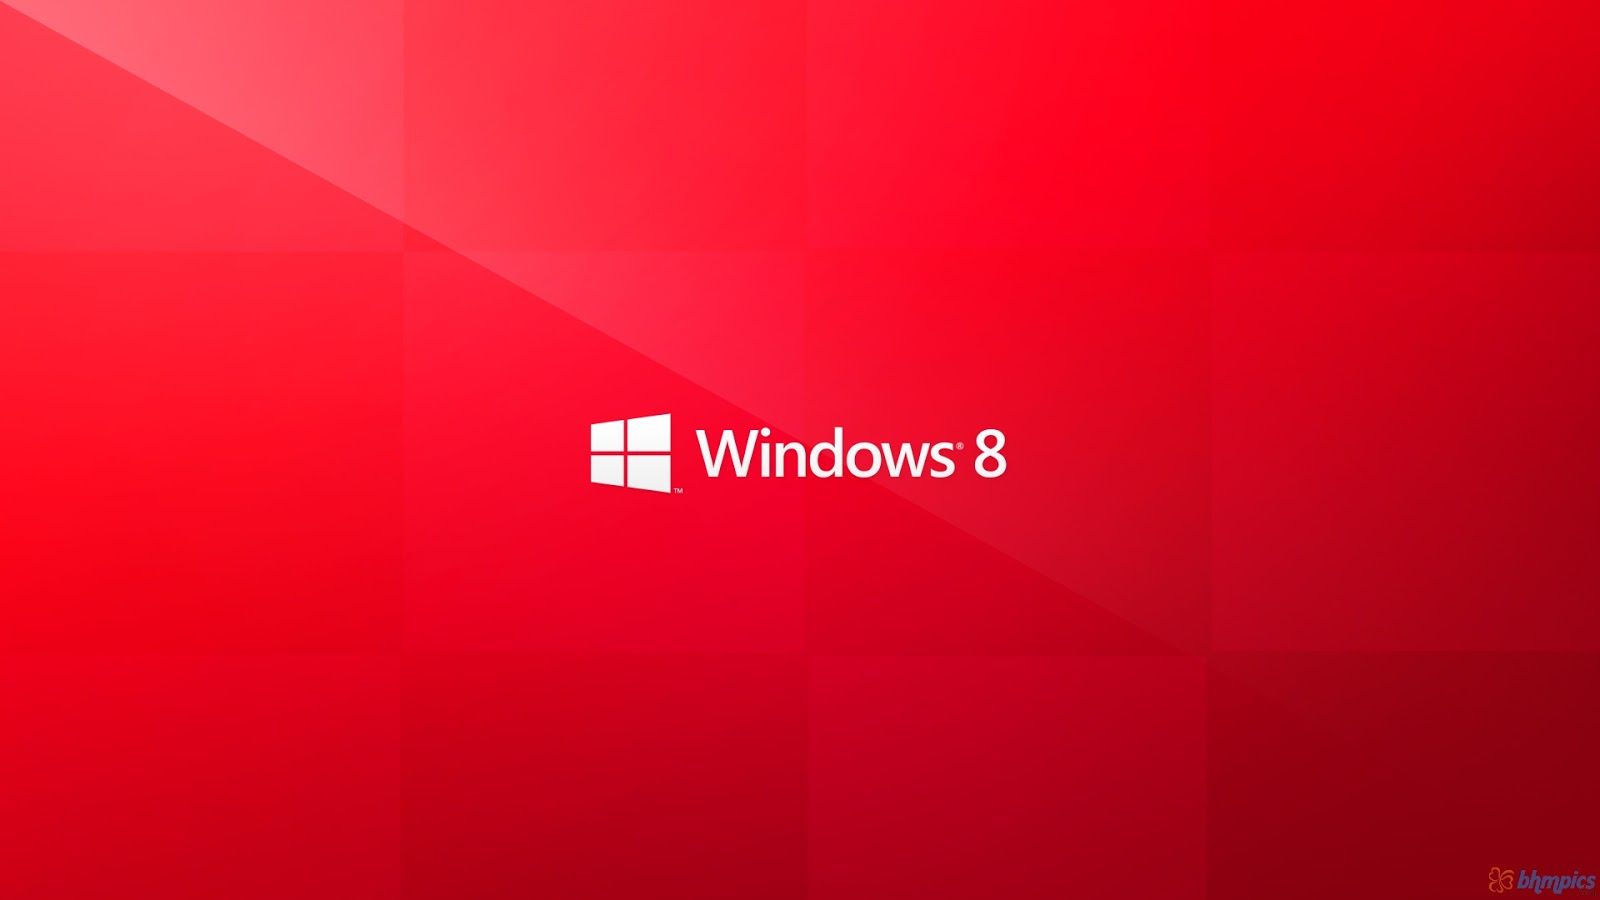 20 Windows 8 Hd Images New Download